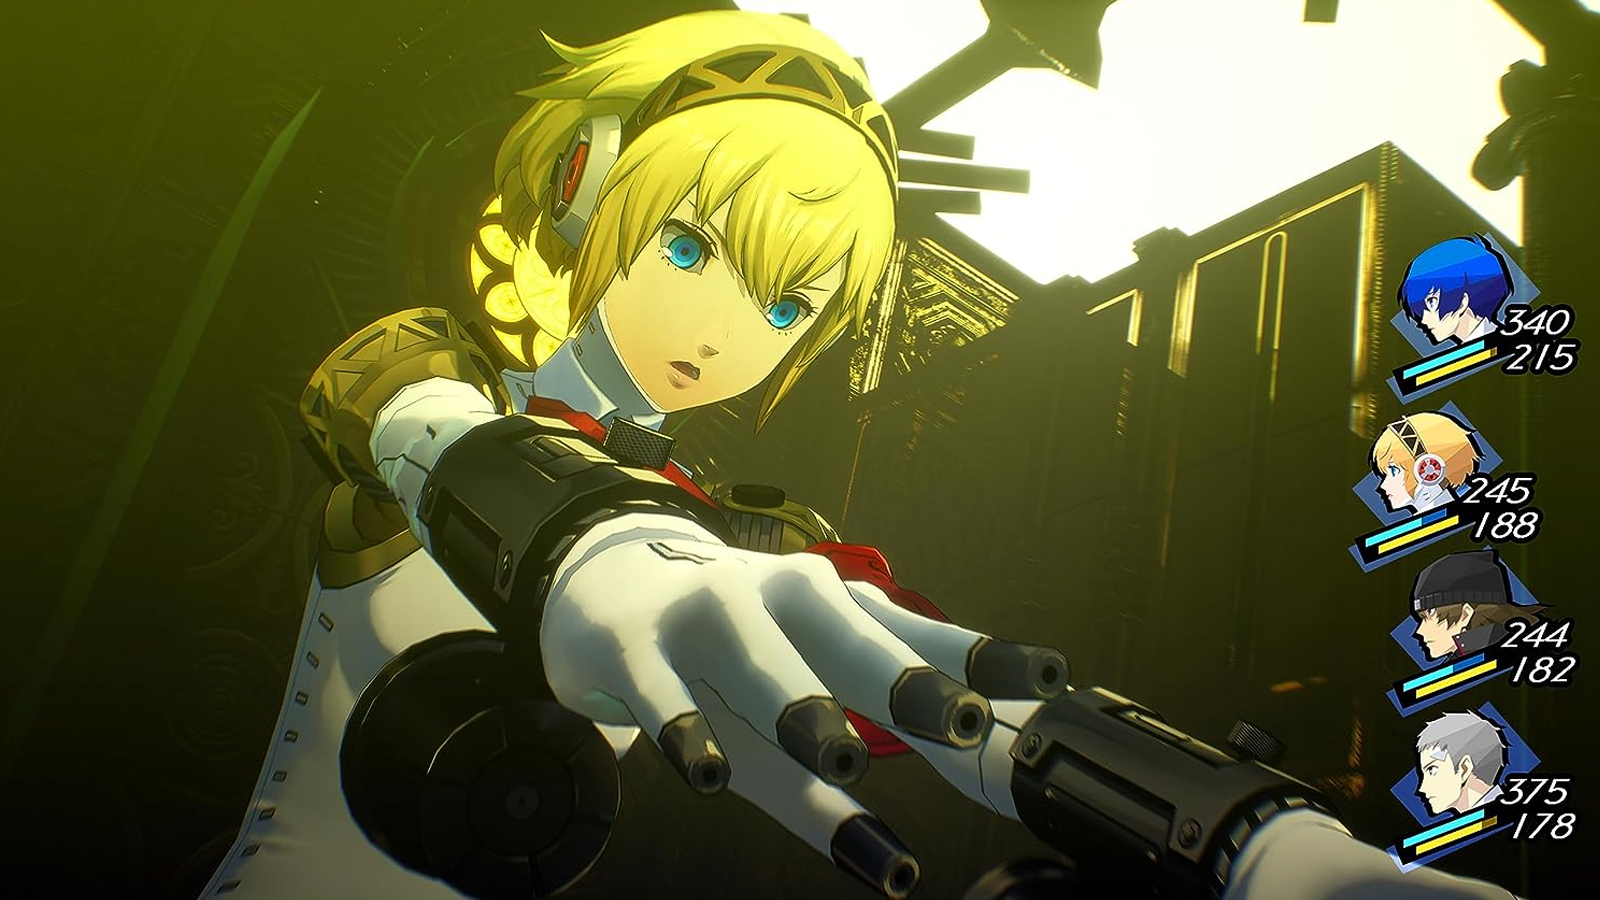 Persona 3 Reload: Where to Pre-order the Collector's Edition of the  Anticipated JRPG?